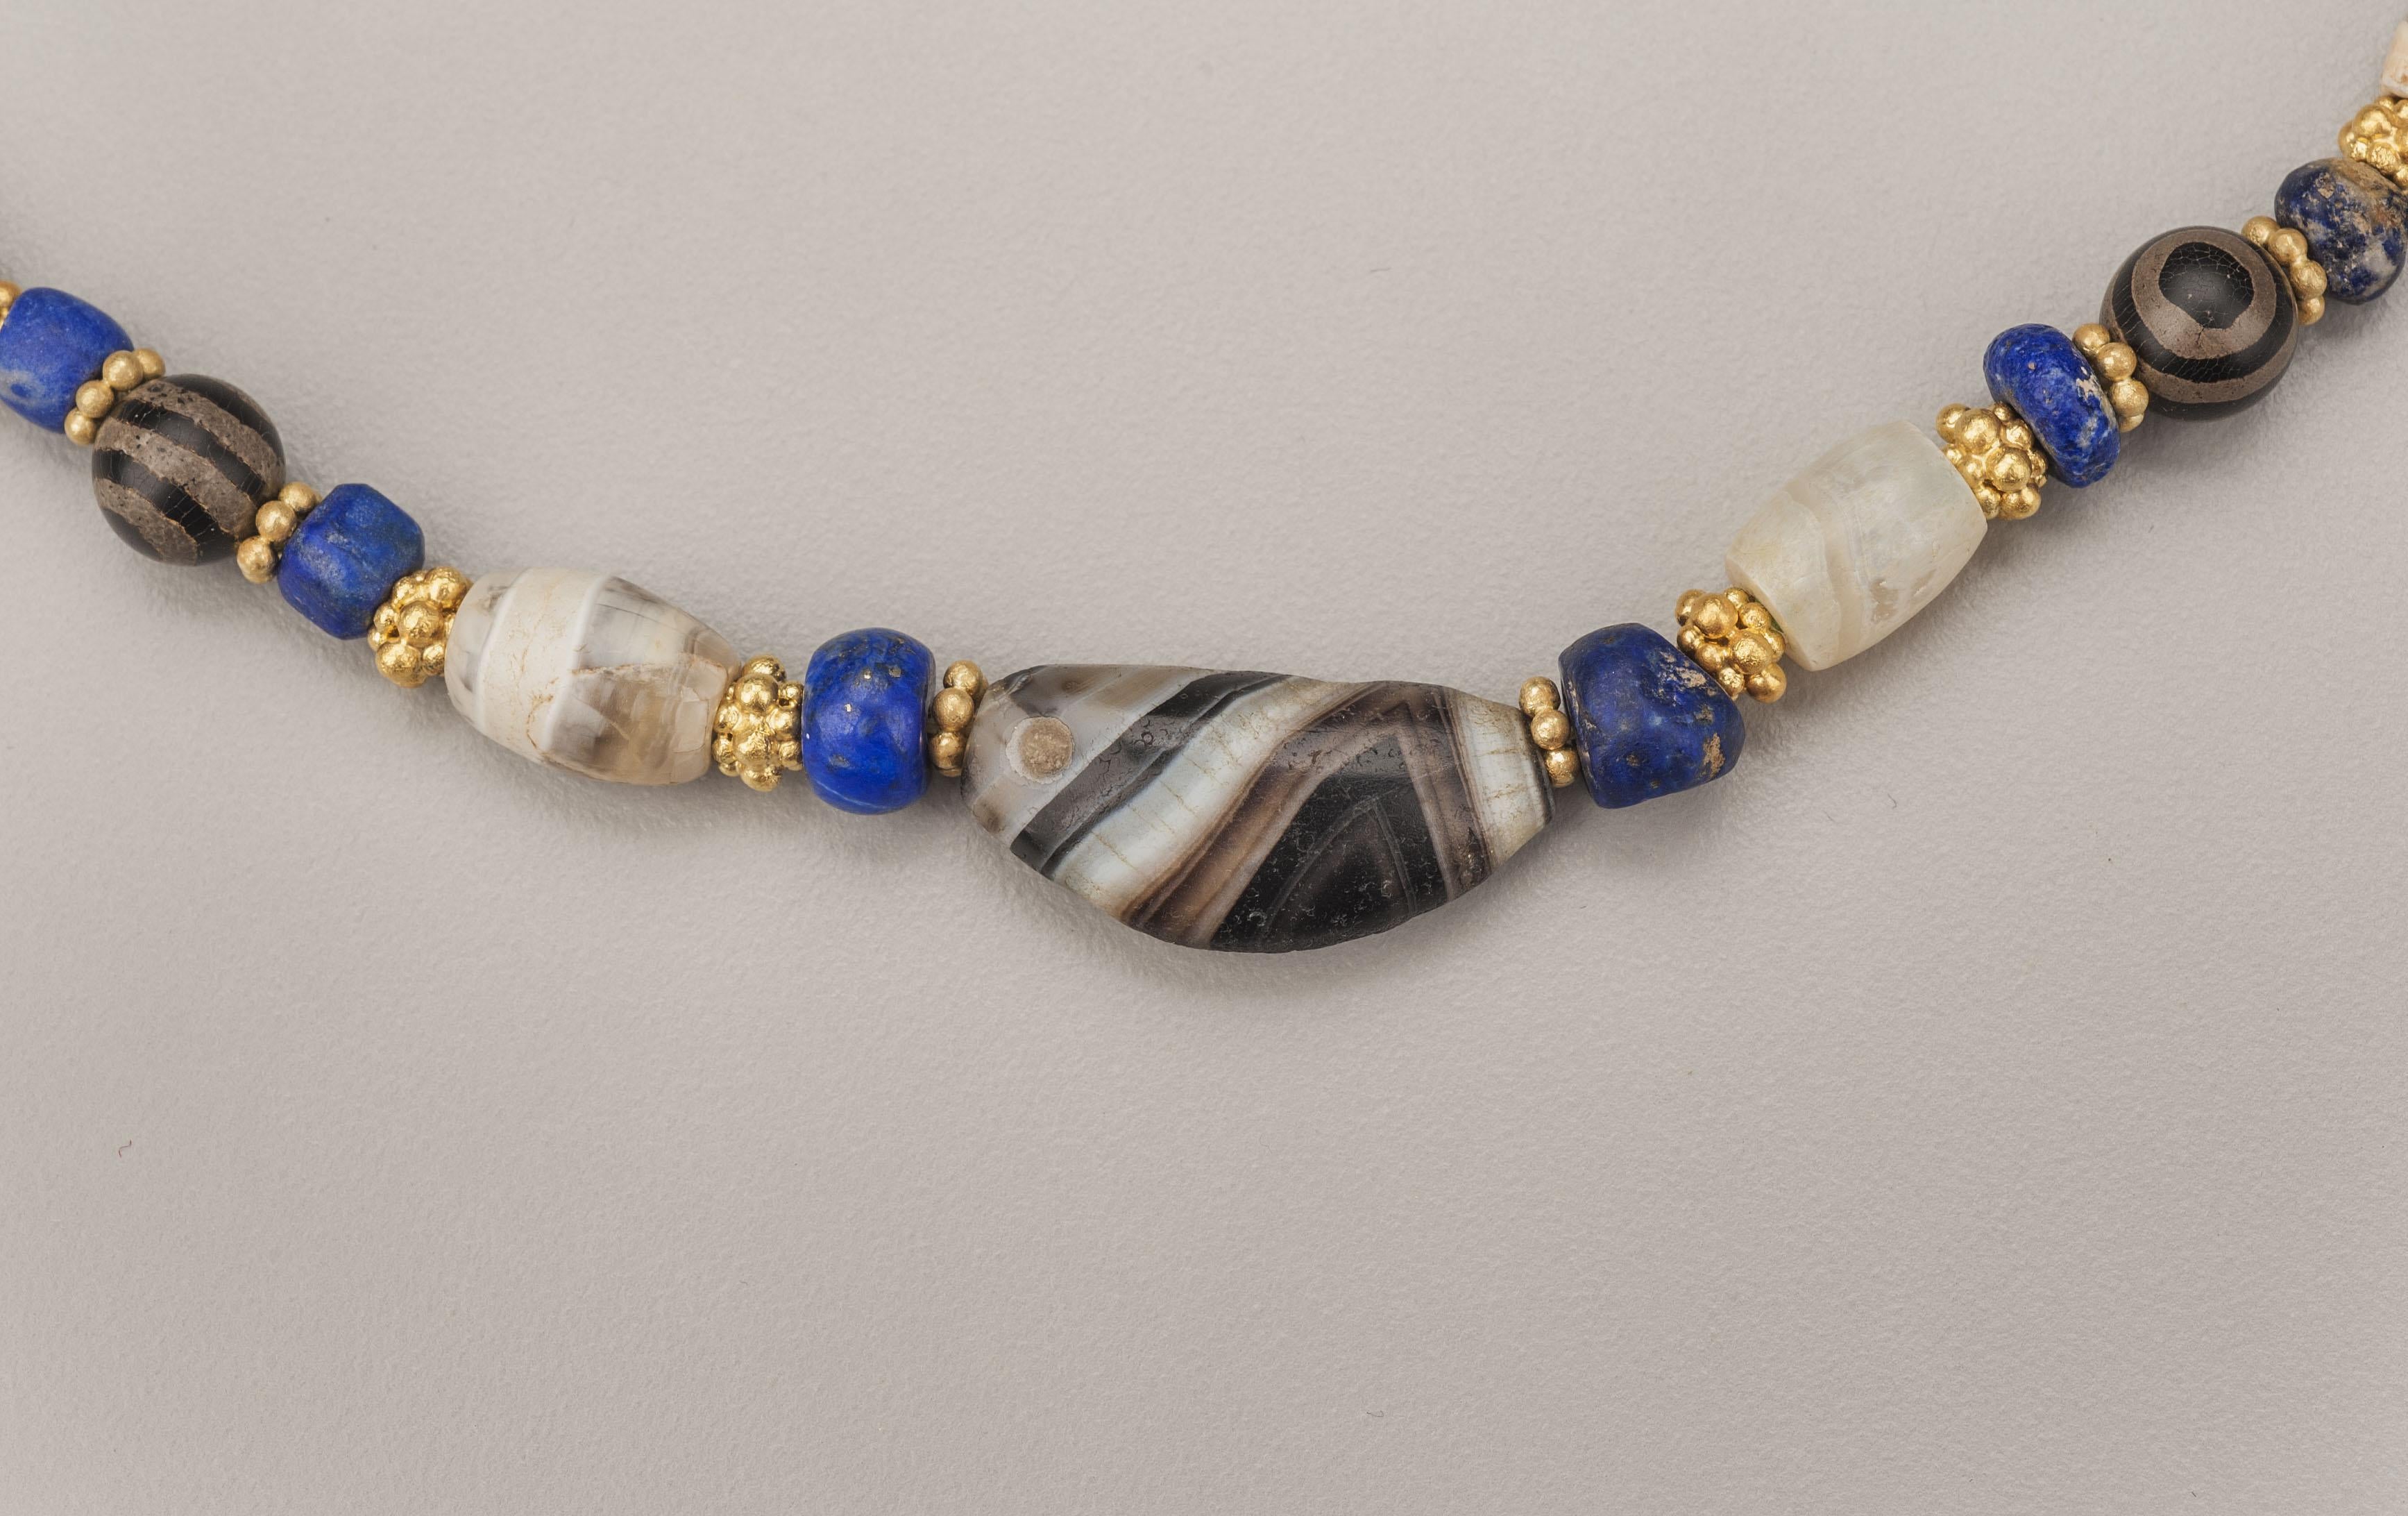 Sixteen agate barrel beads each faced with a three layer gold granulated bead alternating with fourteen spherical etched agate beads each faced with a pair gold granulated ring beads and a pair of small lapis lazuli beads. The center agate bead in